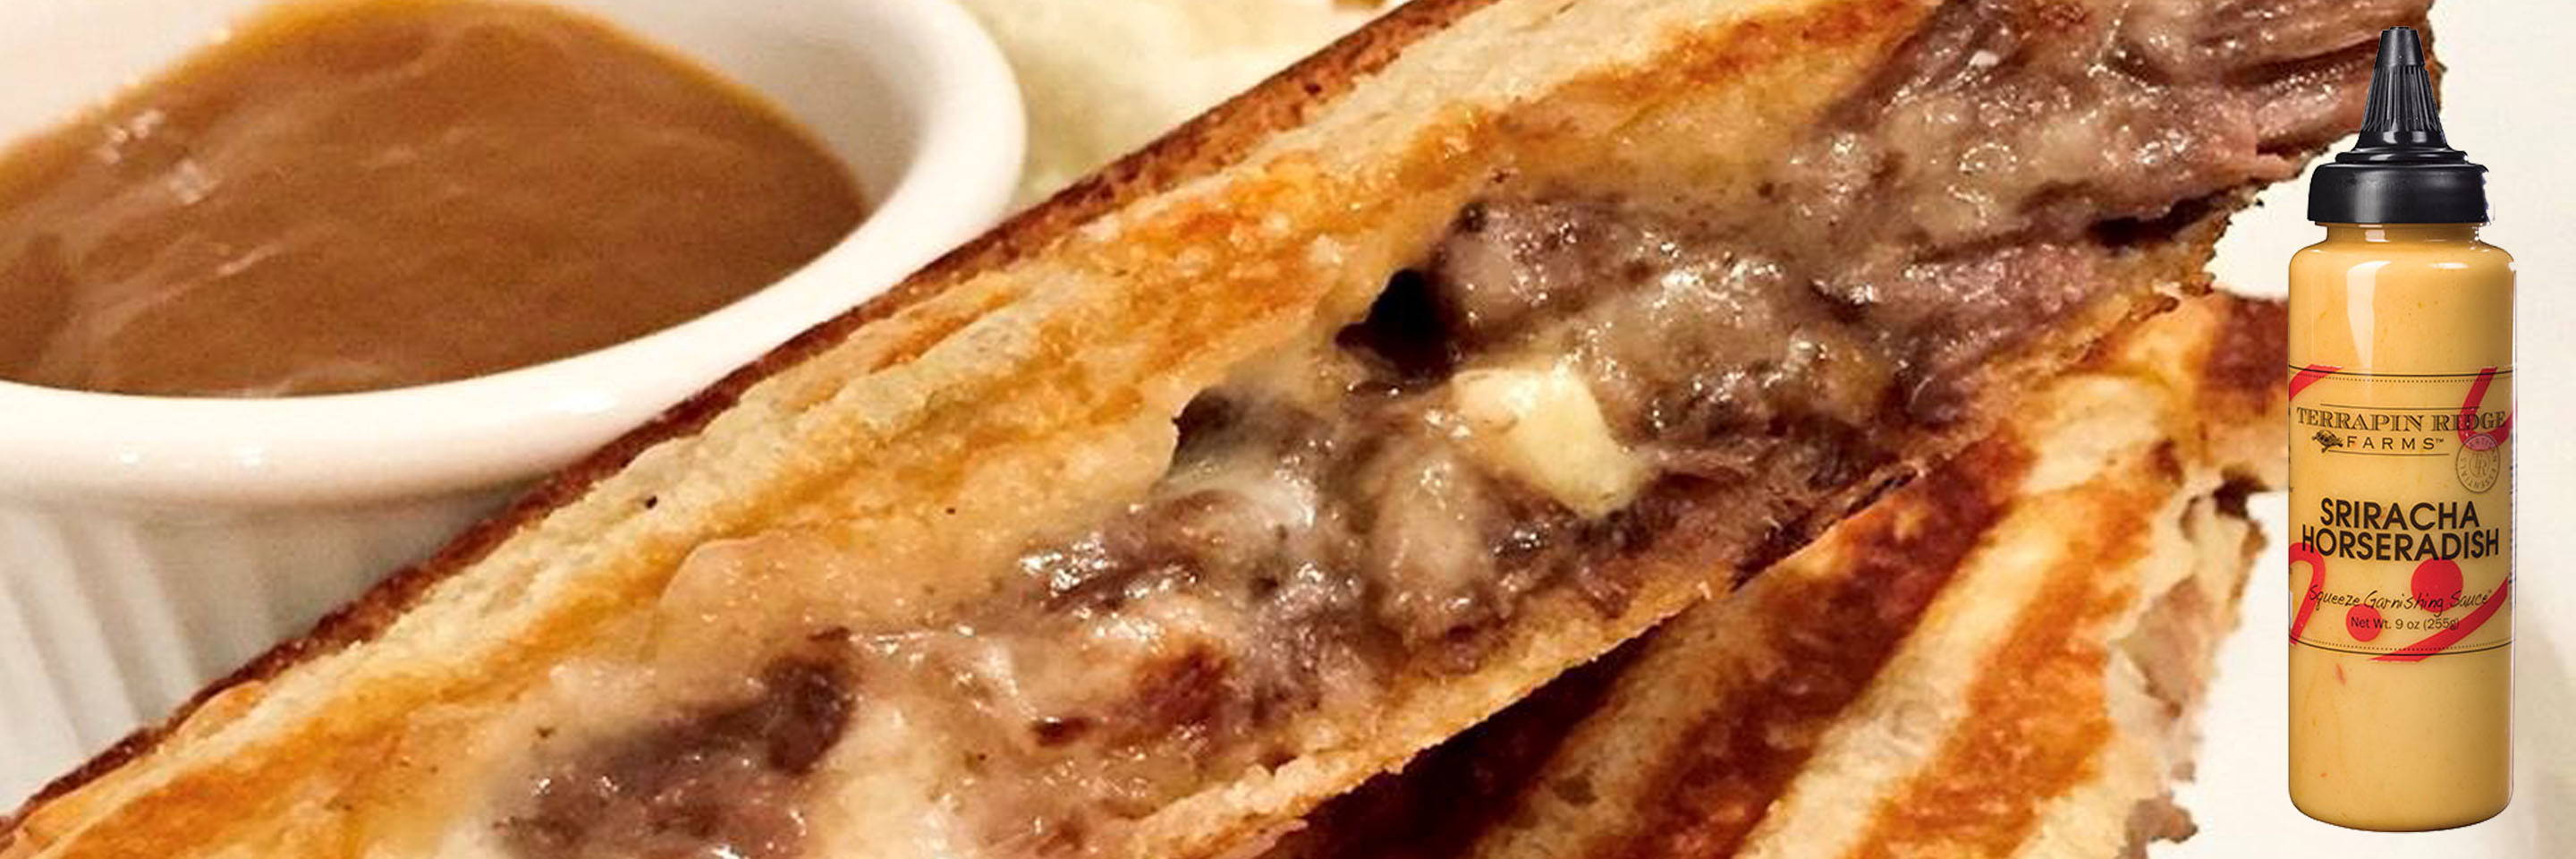 The Nut House Pot Roast Grilled Cheese Sandwich